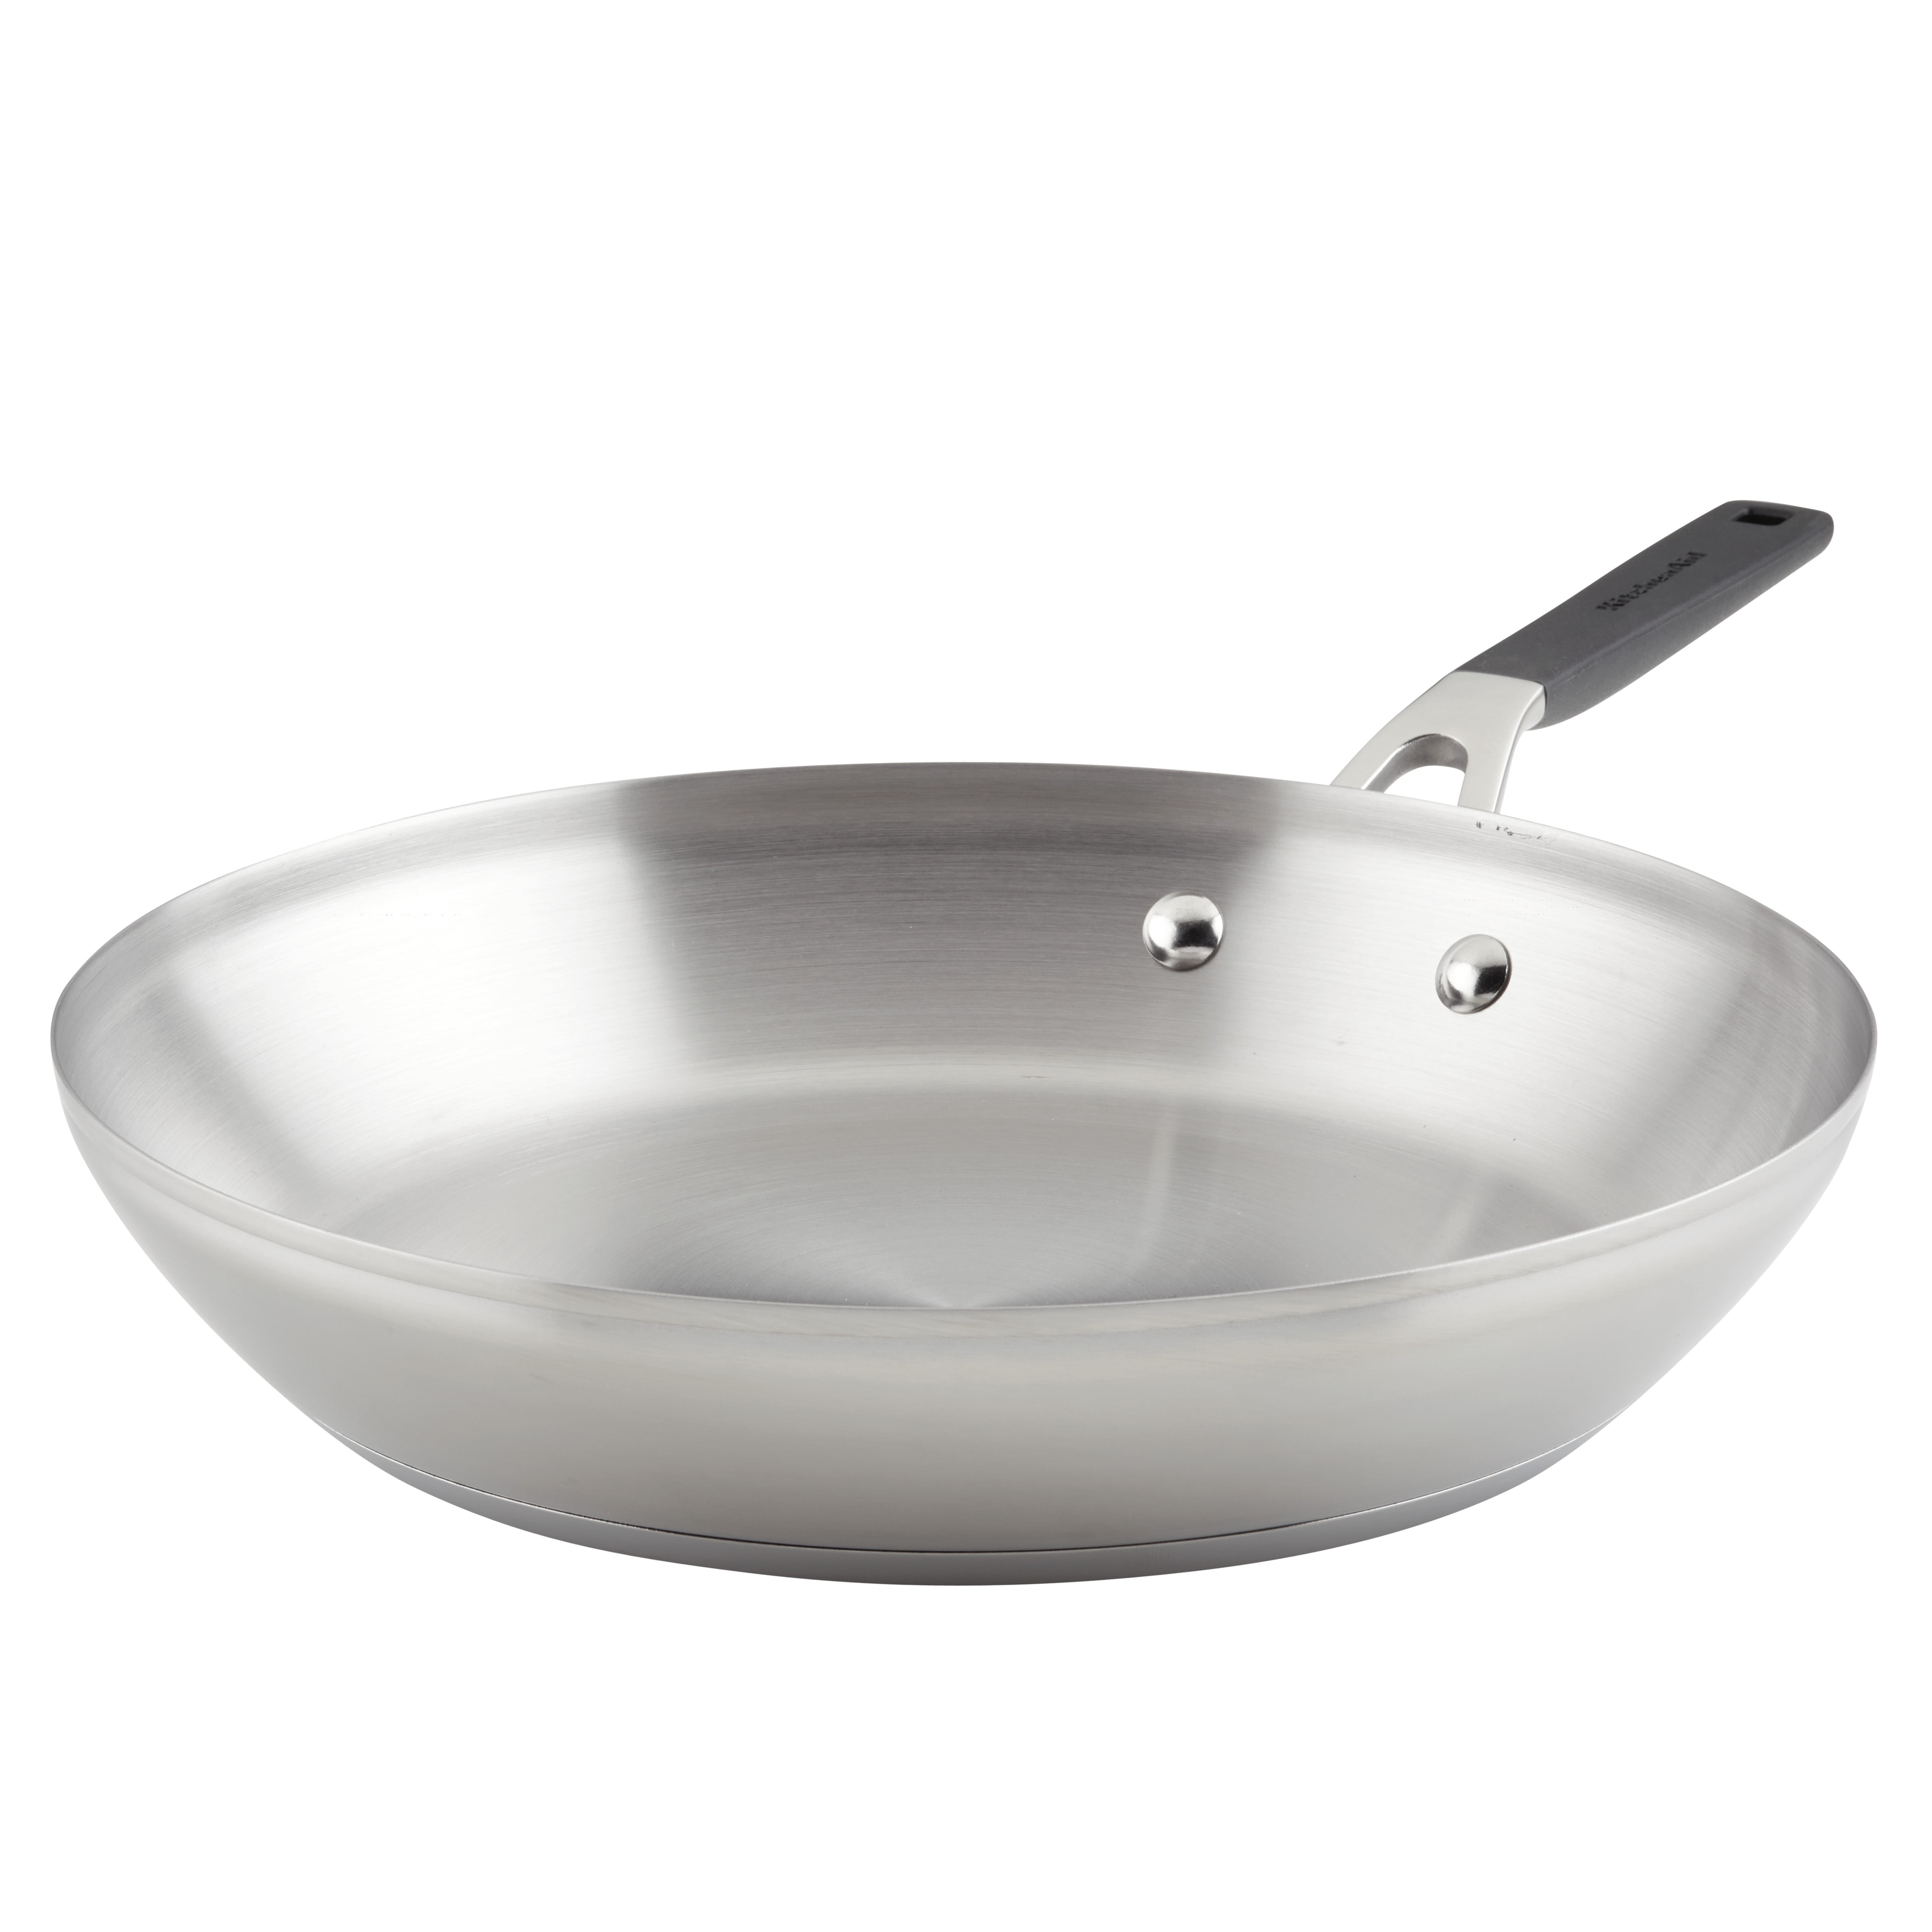 Stainless Steel Induction Frying inch, Stainless Steel - Walmart.com